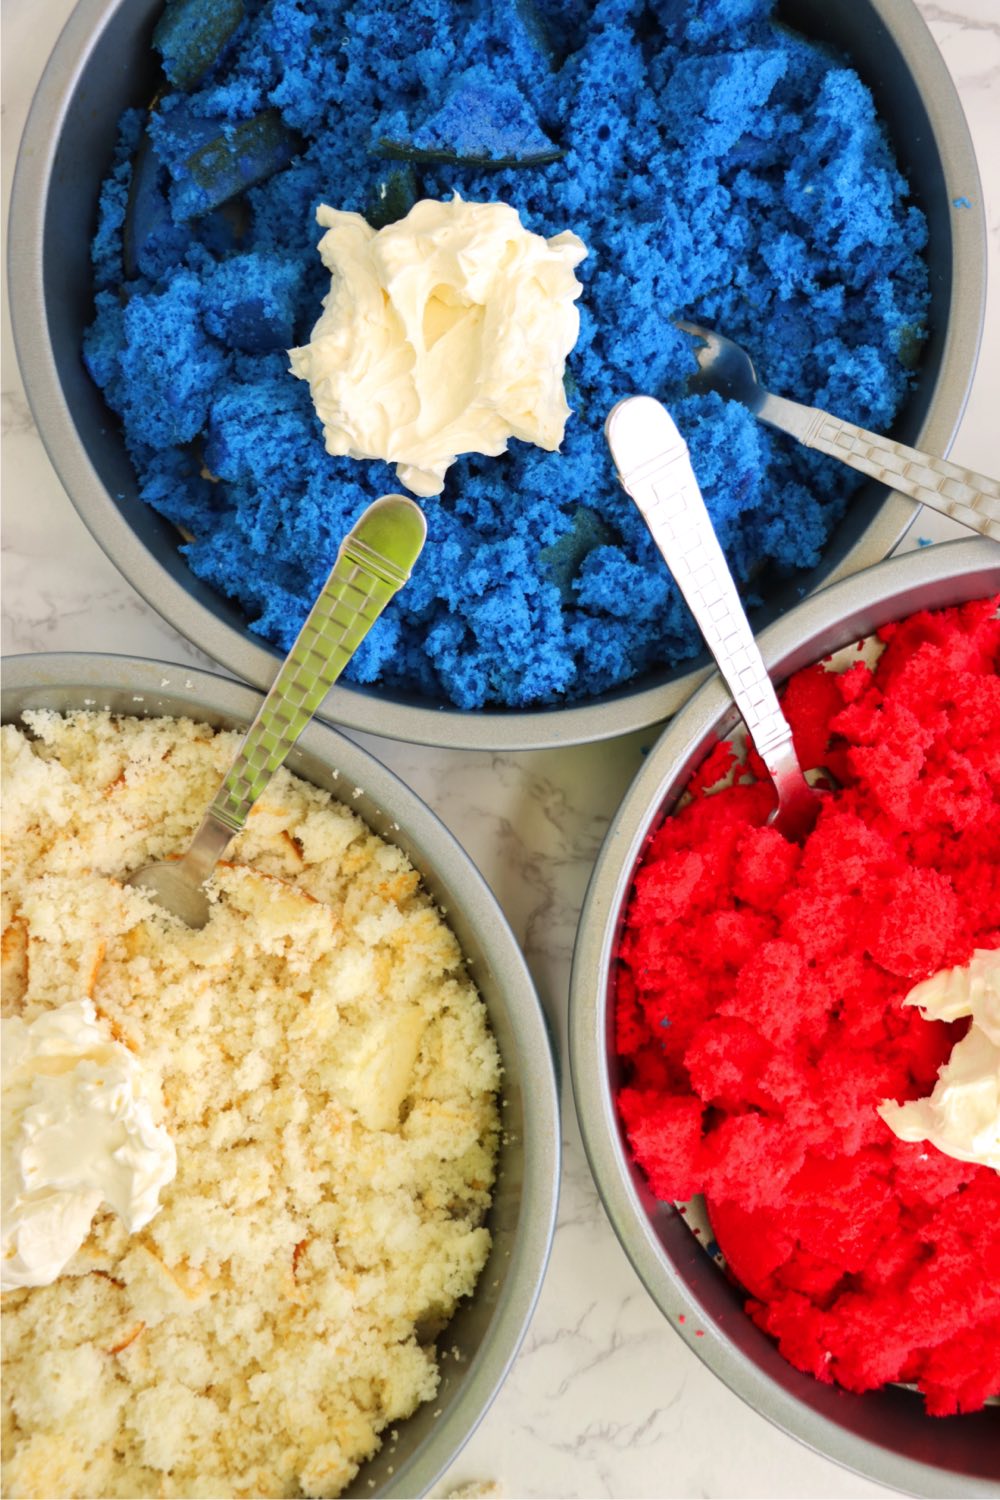 Three cake pans of crumbled red, white and blue cake with dollops of cream cheese on top.